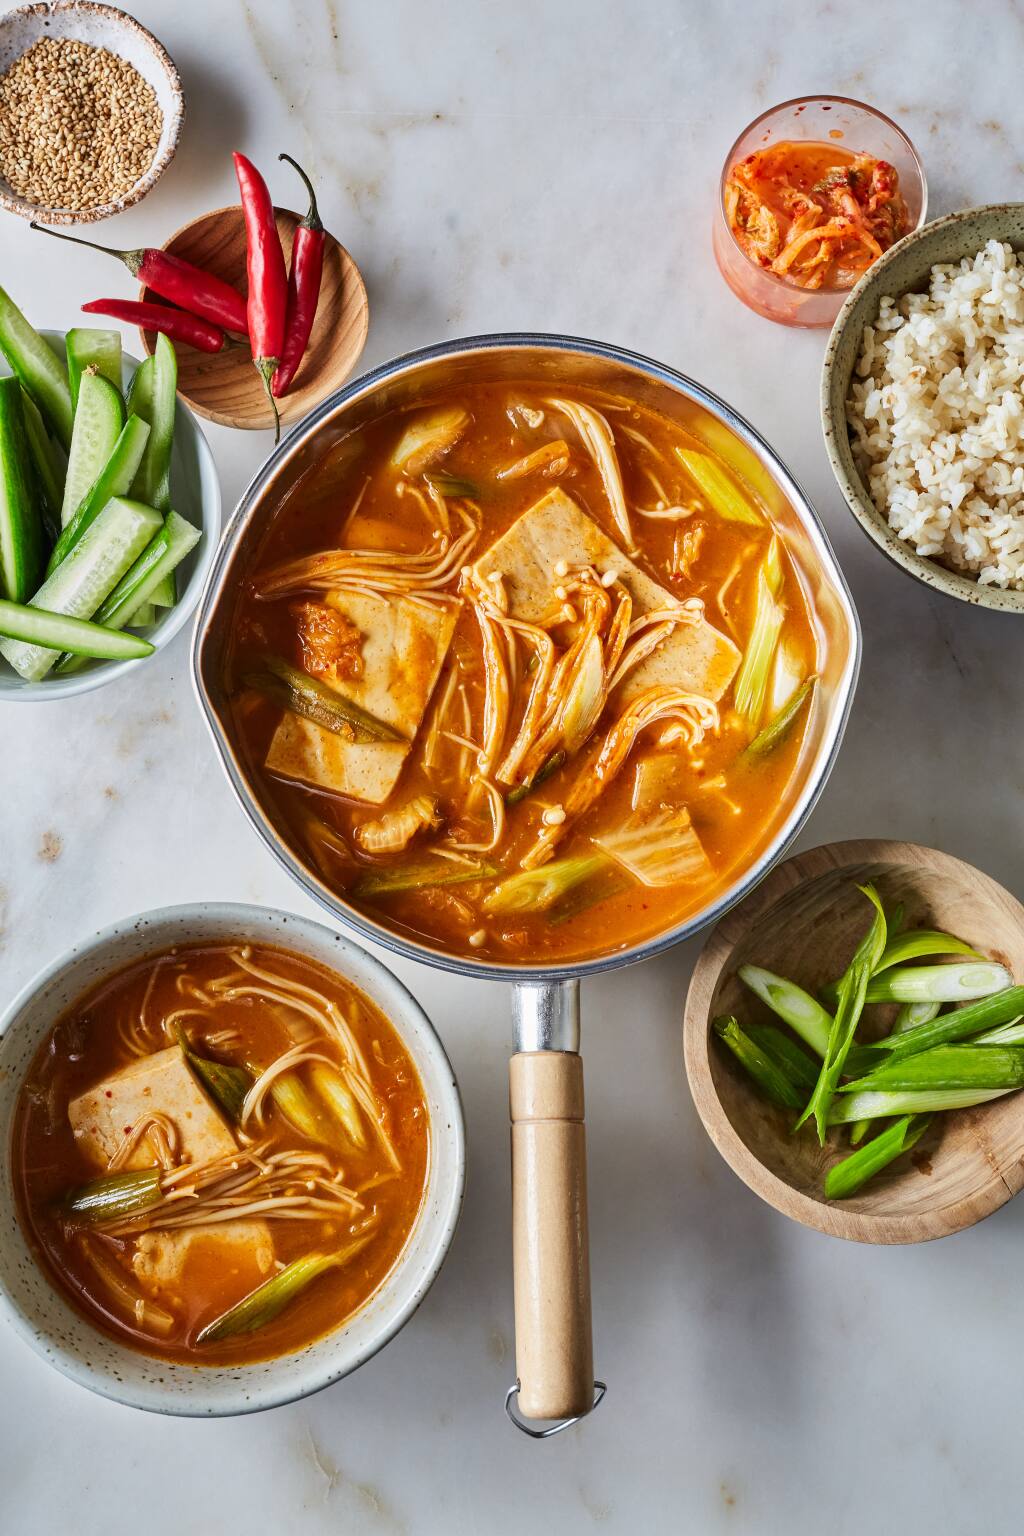 Kimchi Jjigae (Vegan Korean Soft Tofu and Kimchi Stew), from Dr. Linda Shiue’s cookbook “Spicebox Kitchen,” is traditionally cooked in a stone pot, but any heavy pot will work well. (Michelle K. Min/Go Hachette)